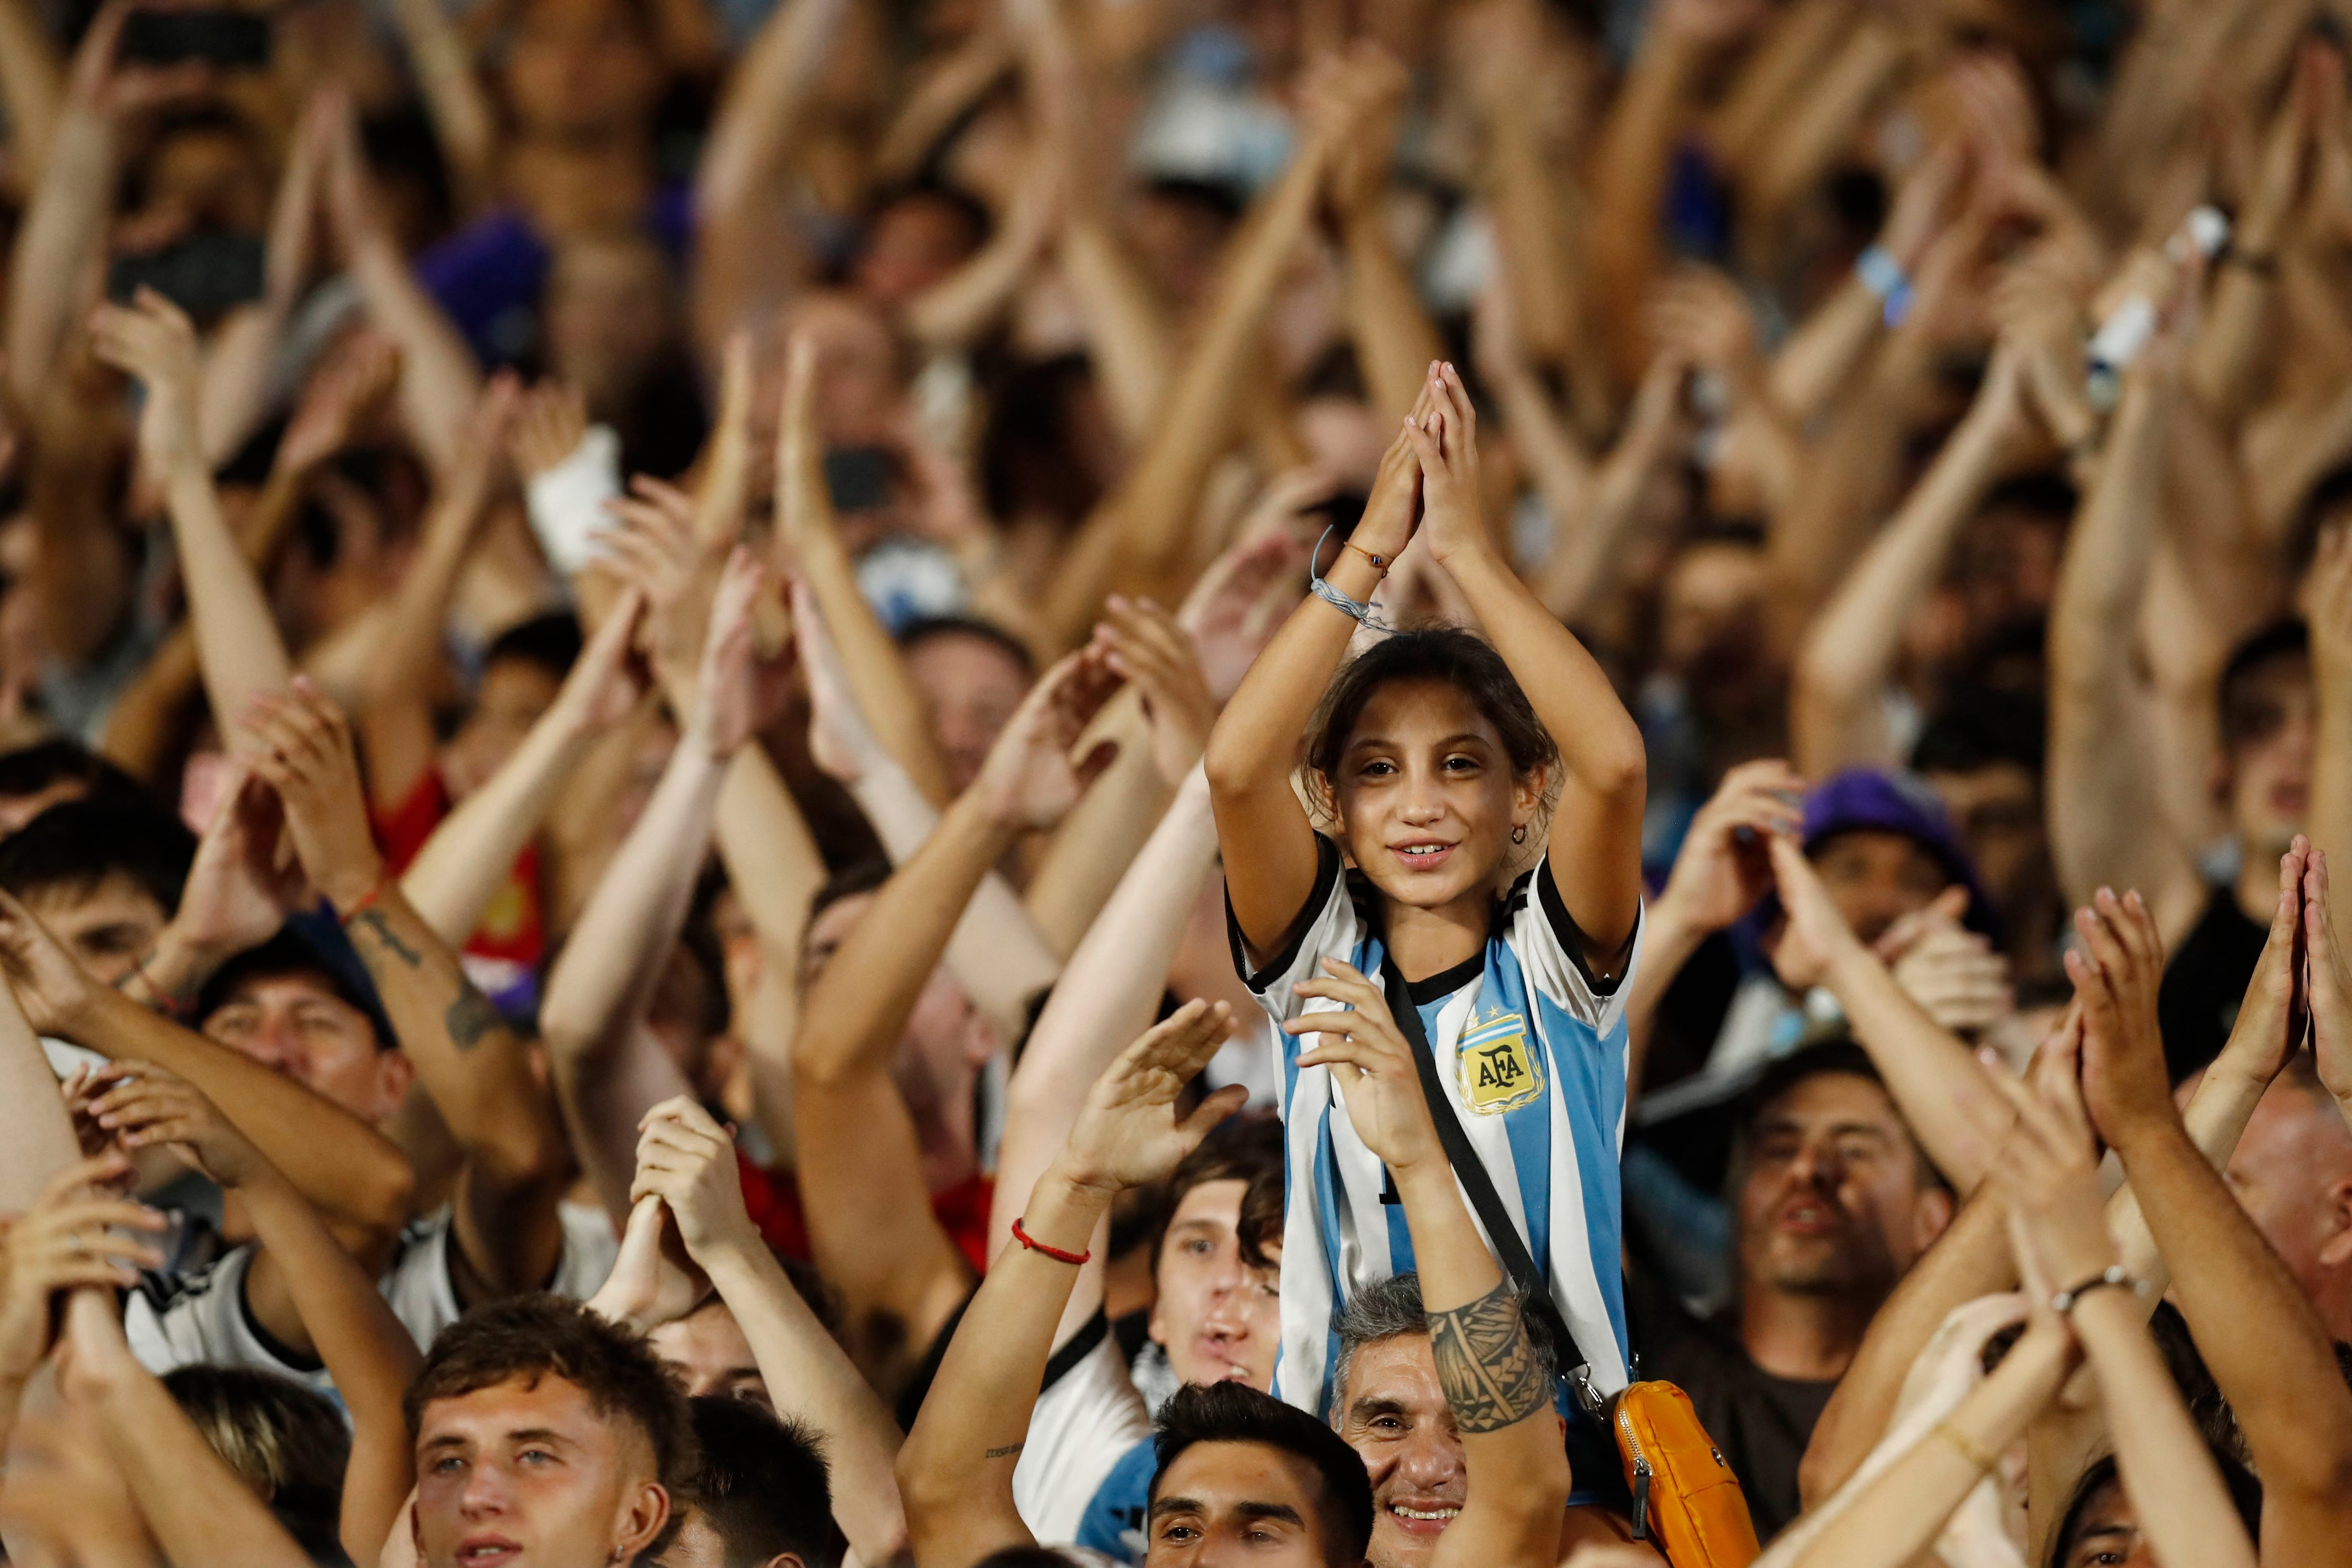 Soccer Football - International Friendly - Argentina v Panama - Estadio Monumental, Buenos Aires, Argentina - March 23, 2023 Argentina fans are seen in the stands after the match REUTERS/Agustin Marcarian